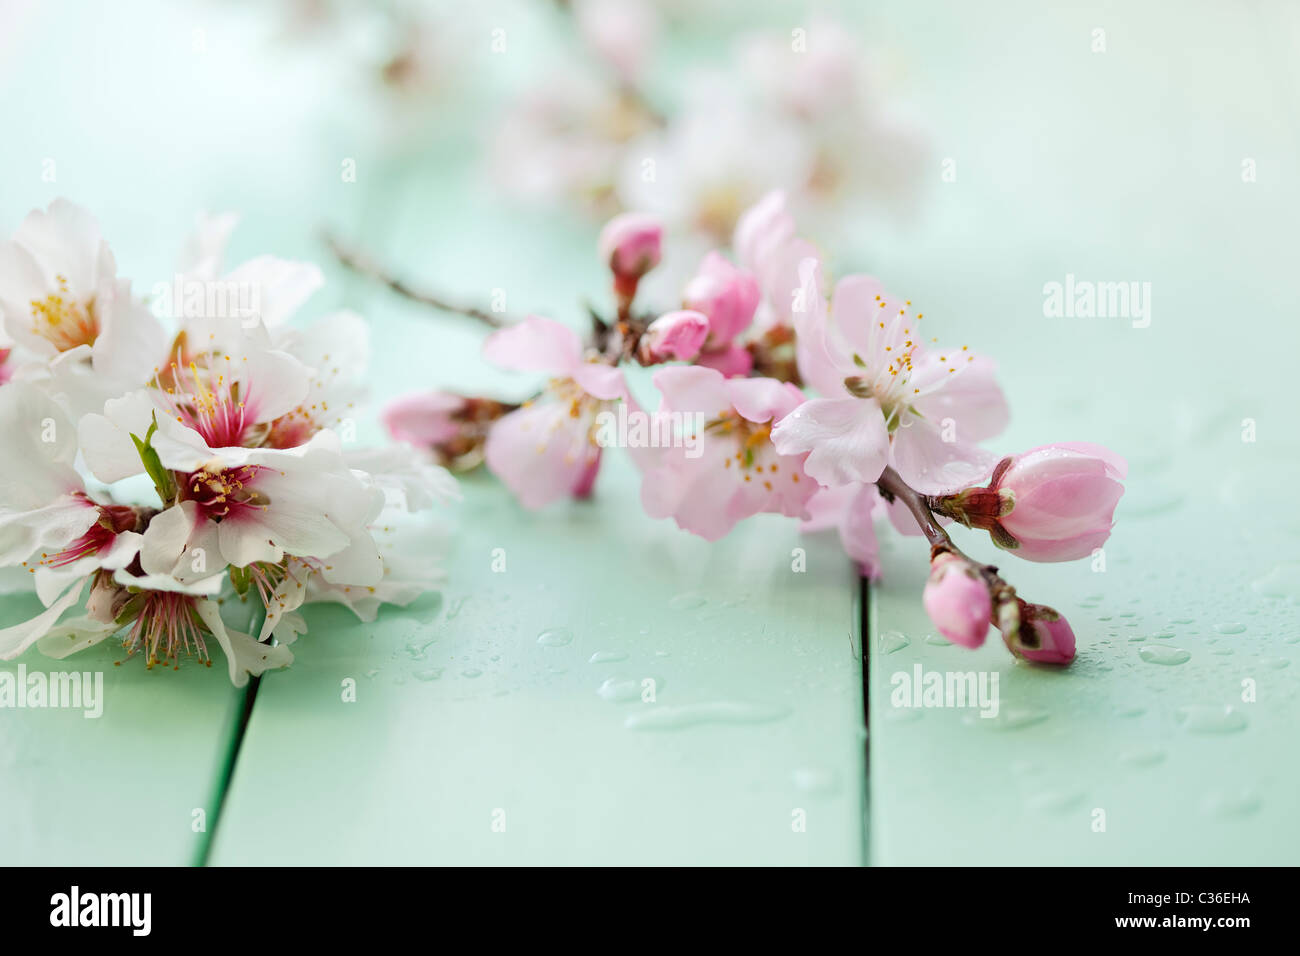 close up of almond blossom on a table, shallow dof Stock Photo